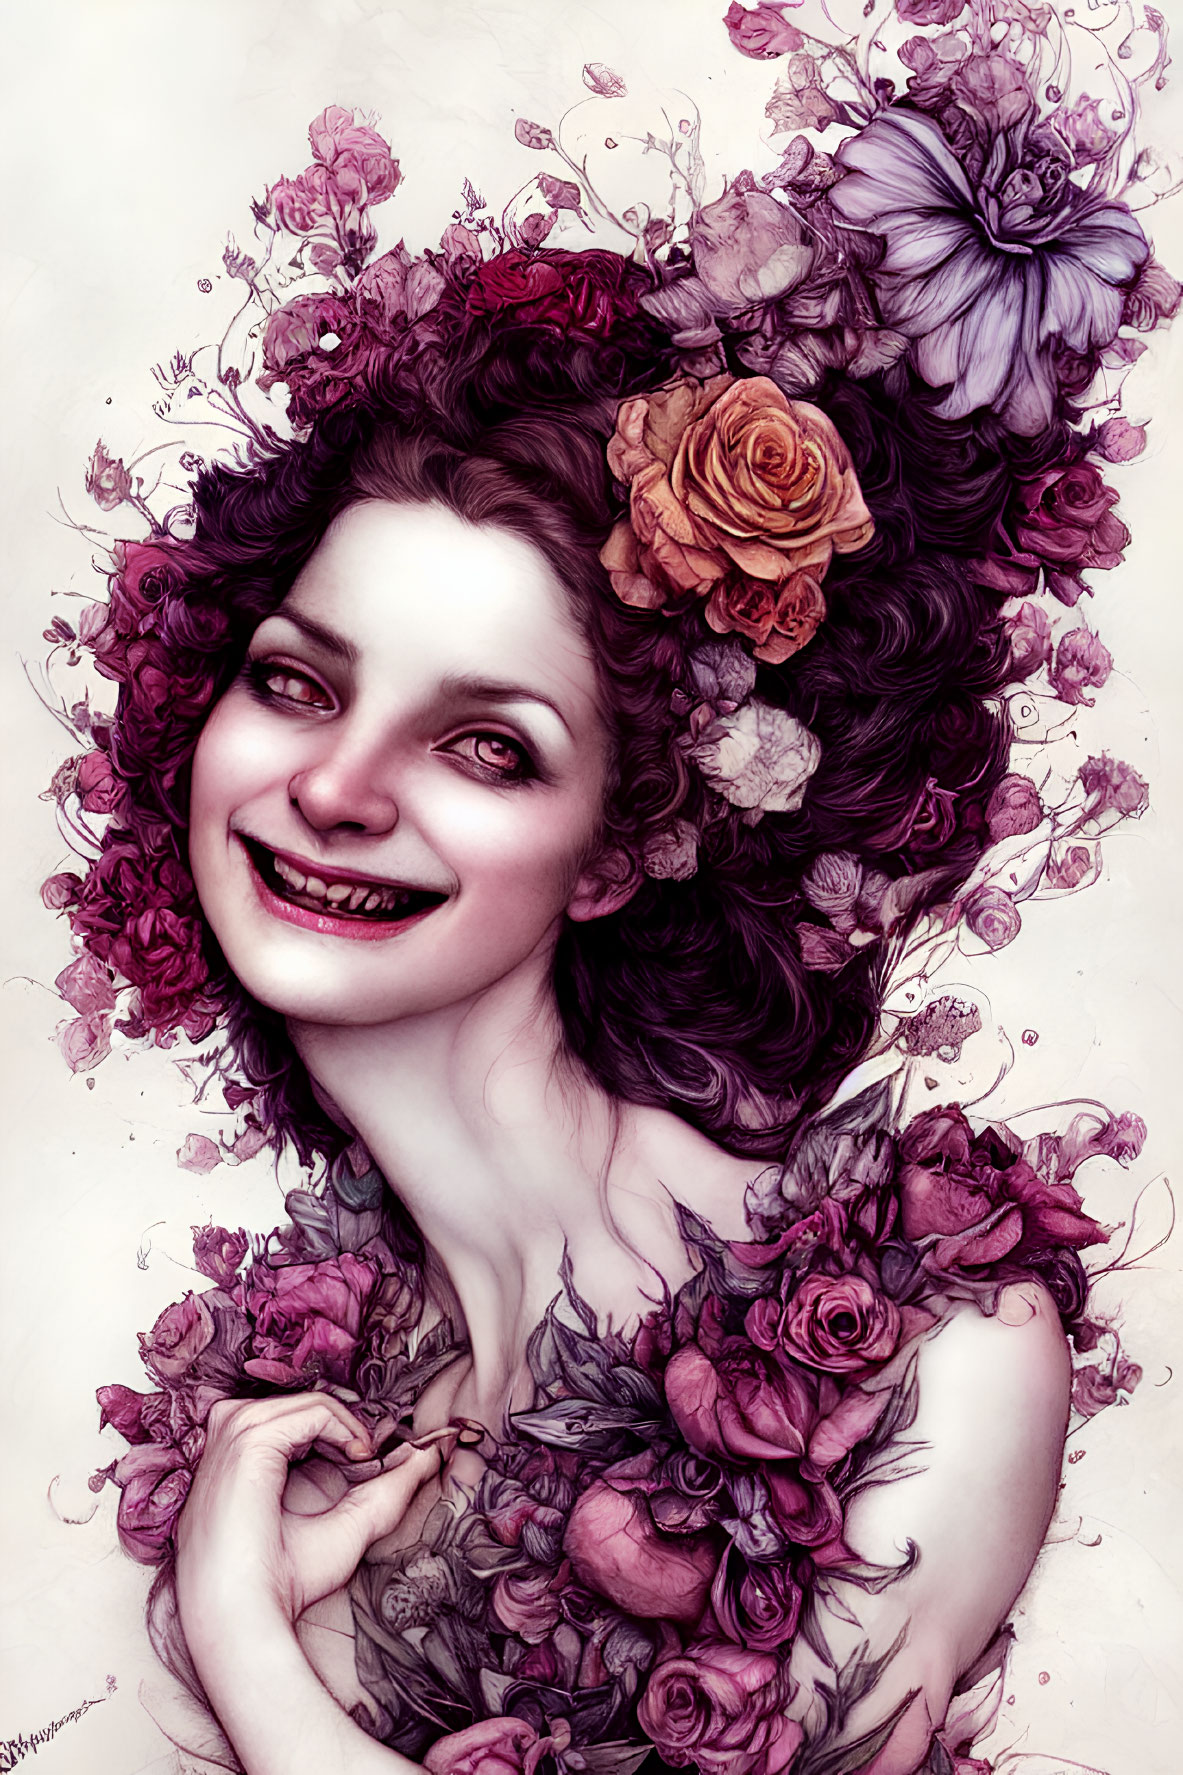 Illustration of woman with floral headdress and bouquet in pink and purple tones